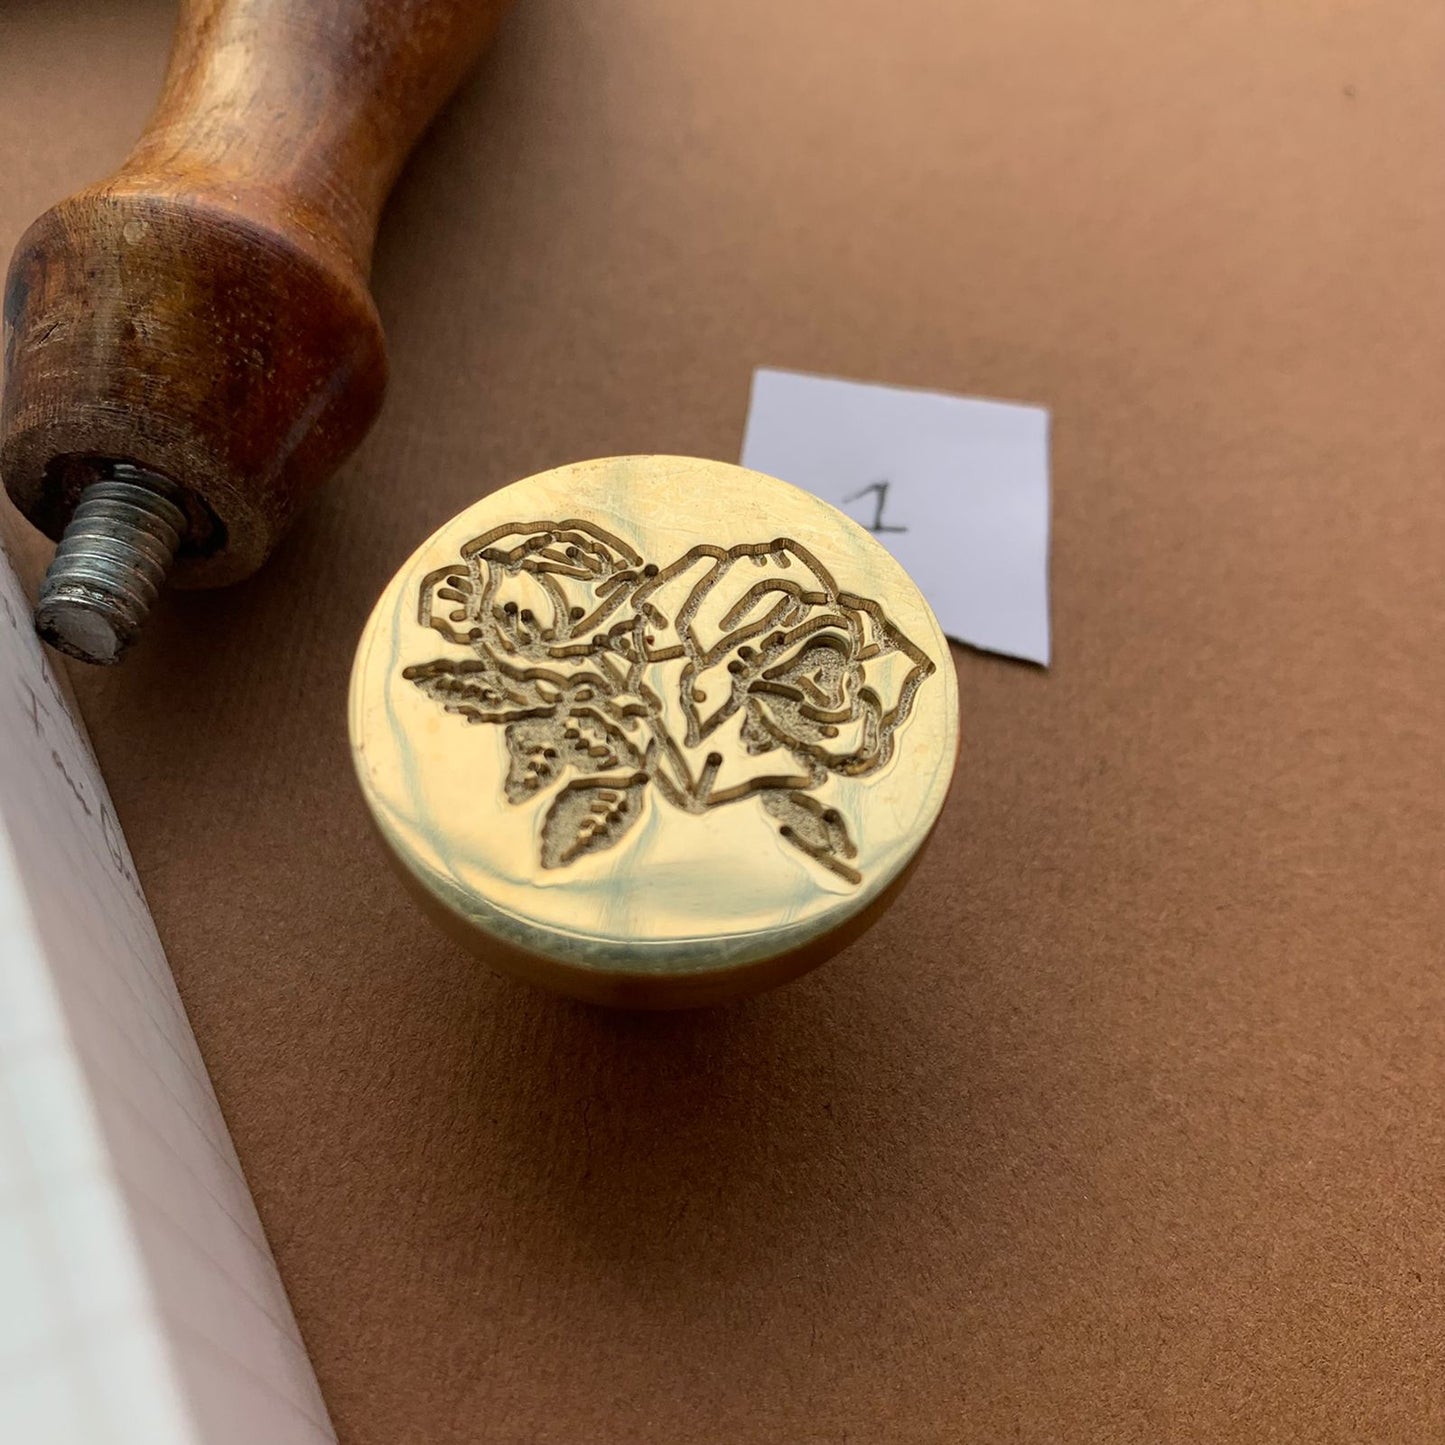 AW1 - Premium Seal Wax Stamp with Wooden Handle | 30mm Diameter